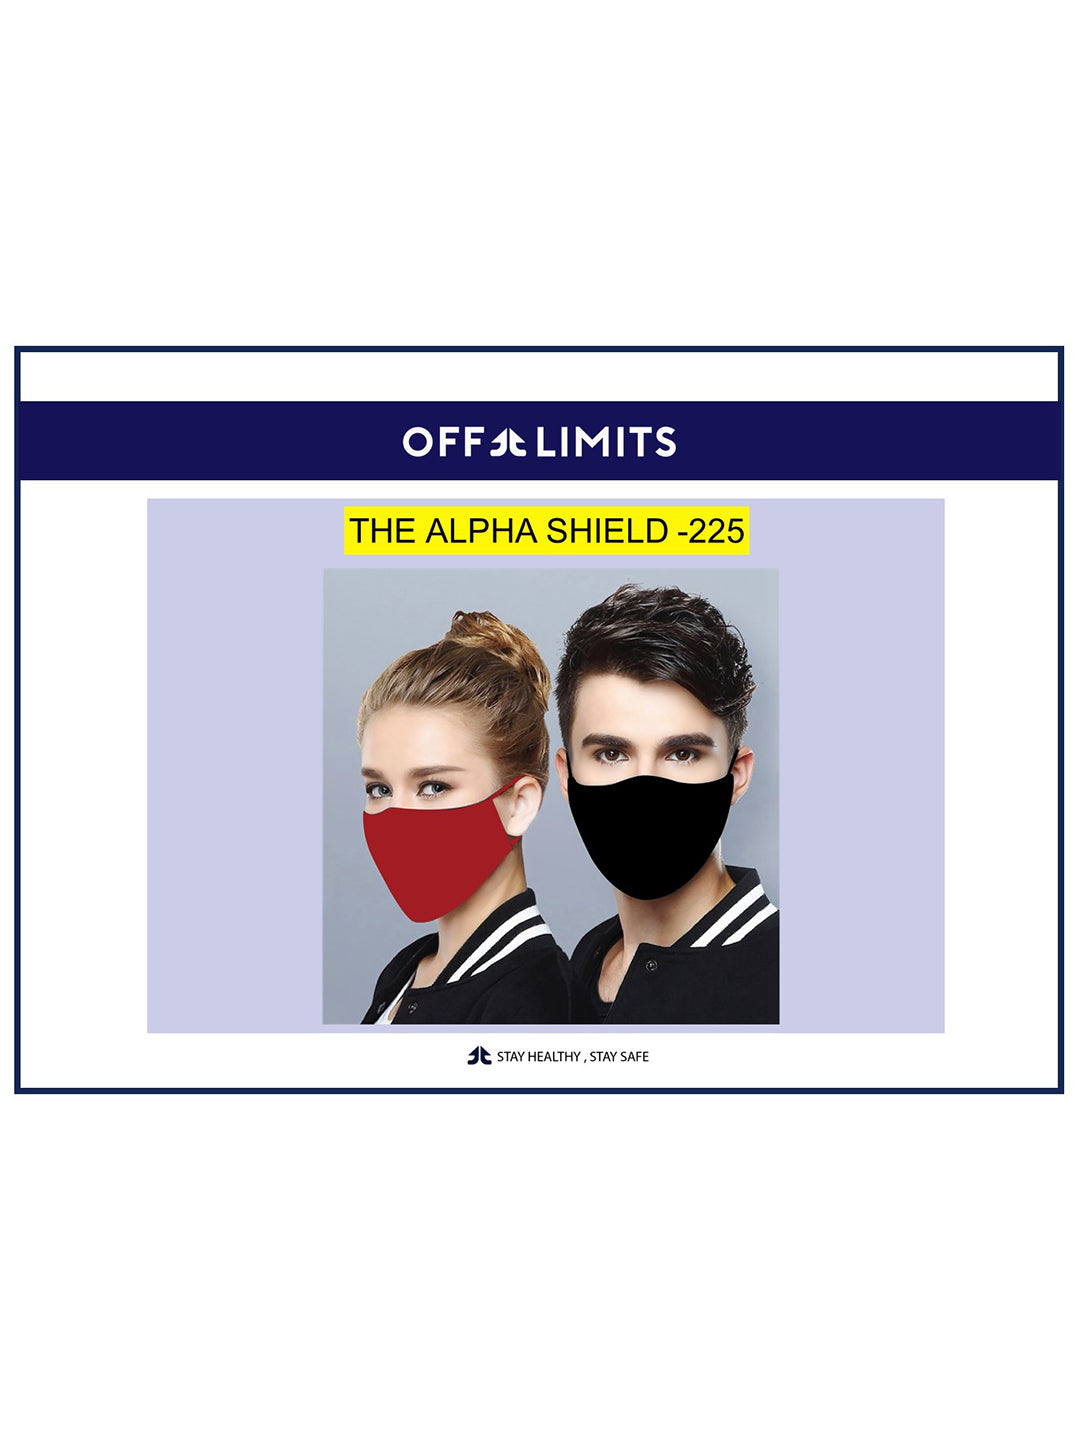 THE ALPHA SHIELD 225 PACK OF 5 Face Mask